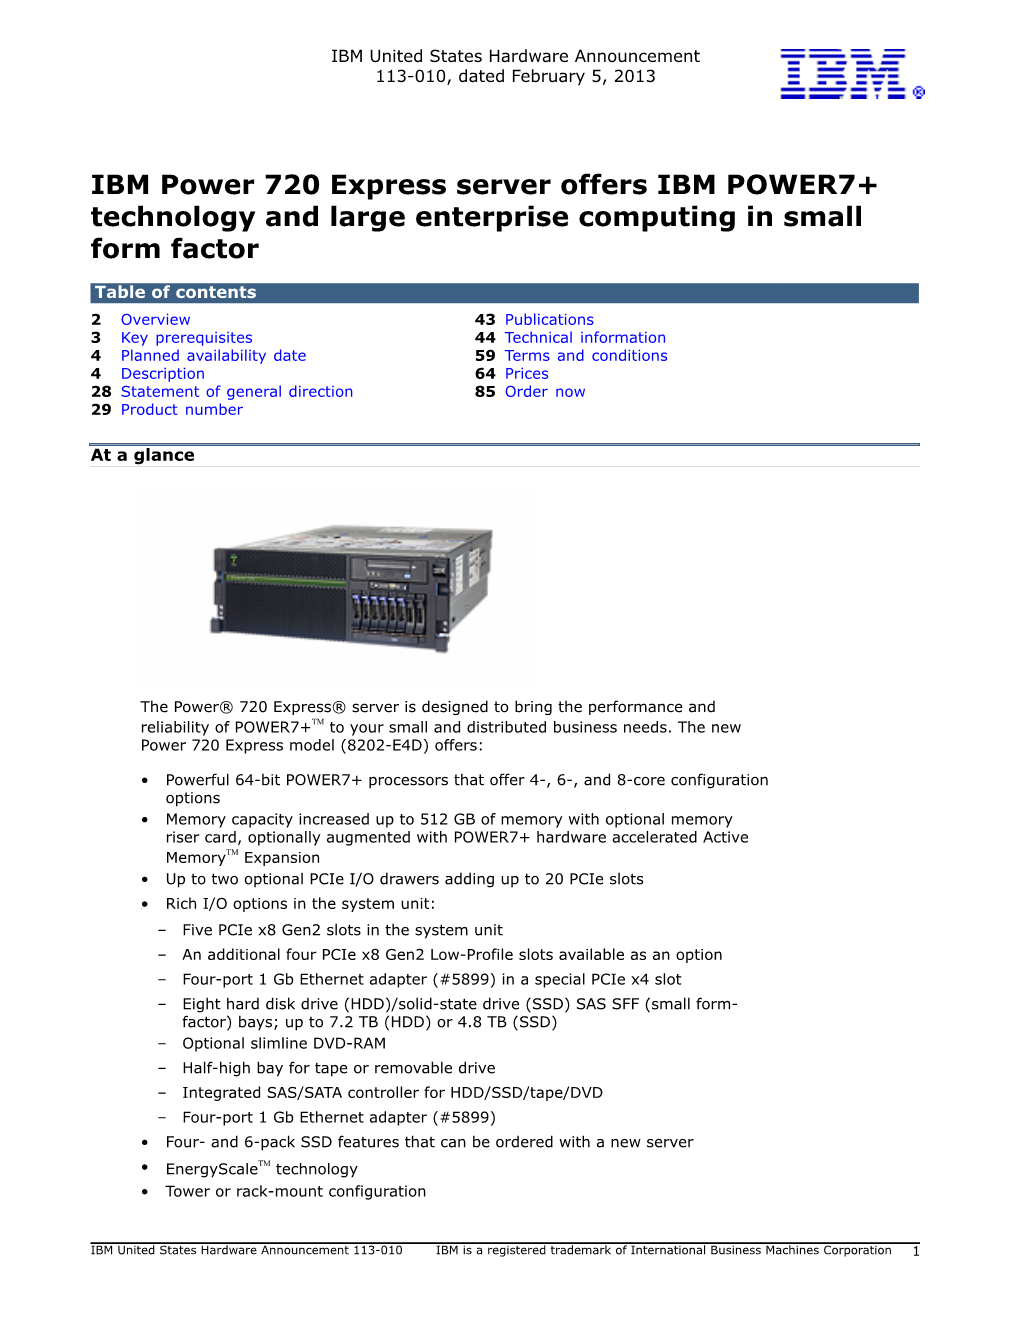 IBM Power 720 Express Server Offers IBM POWER7+ Technology and Large Enterprise Computing in Small Form Factor